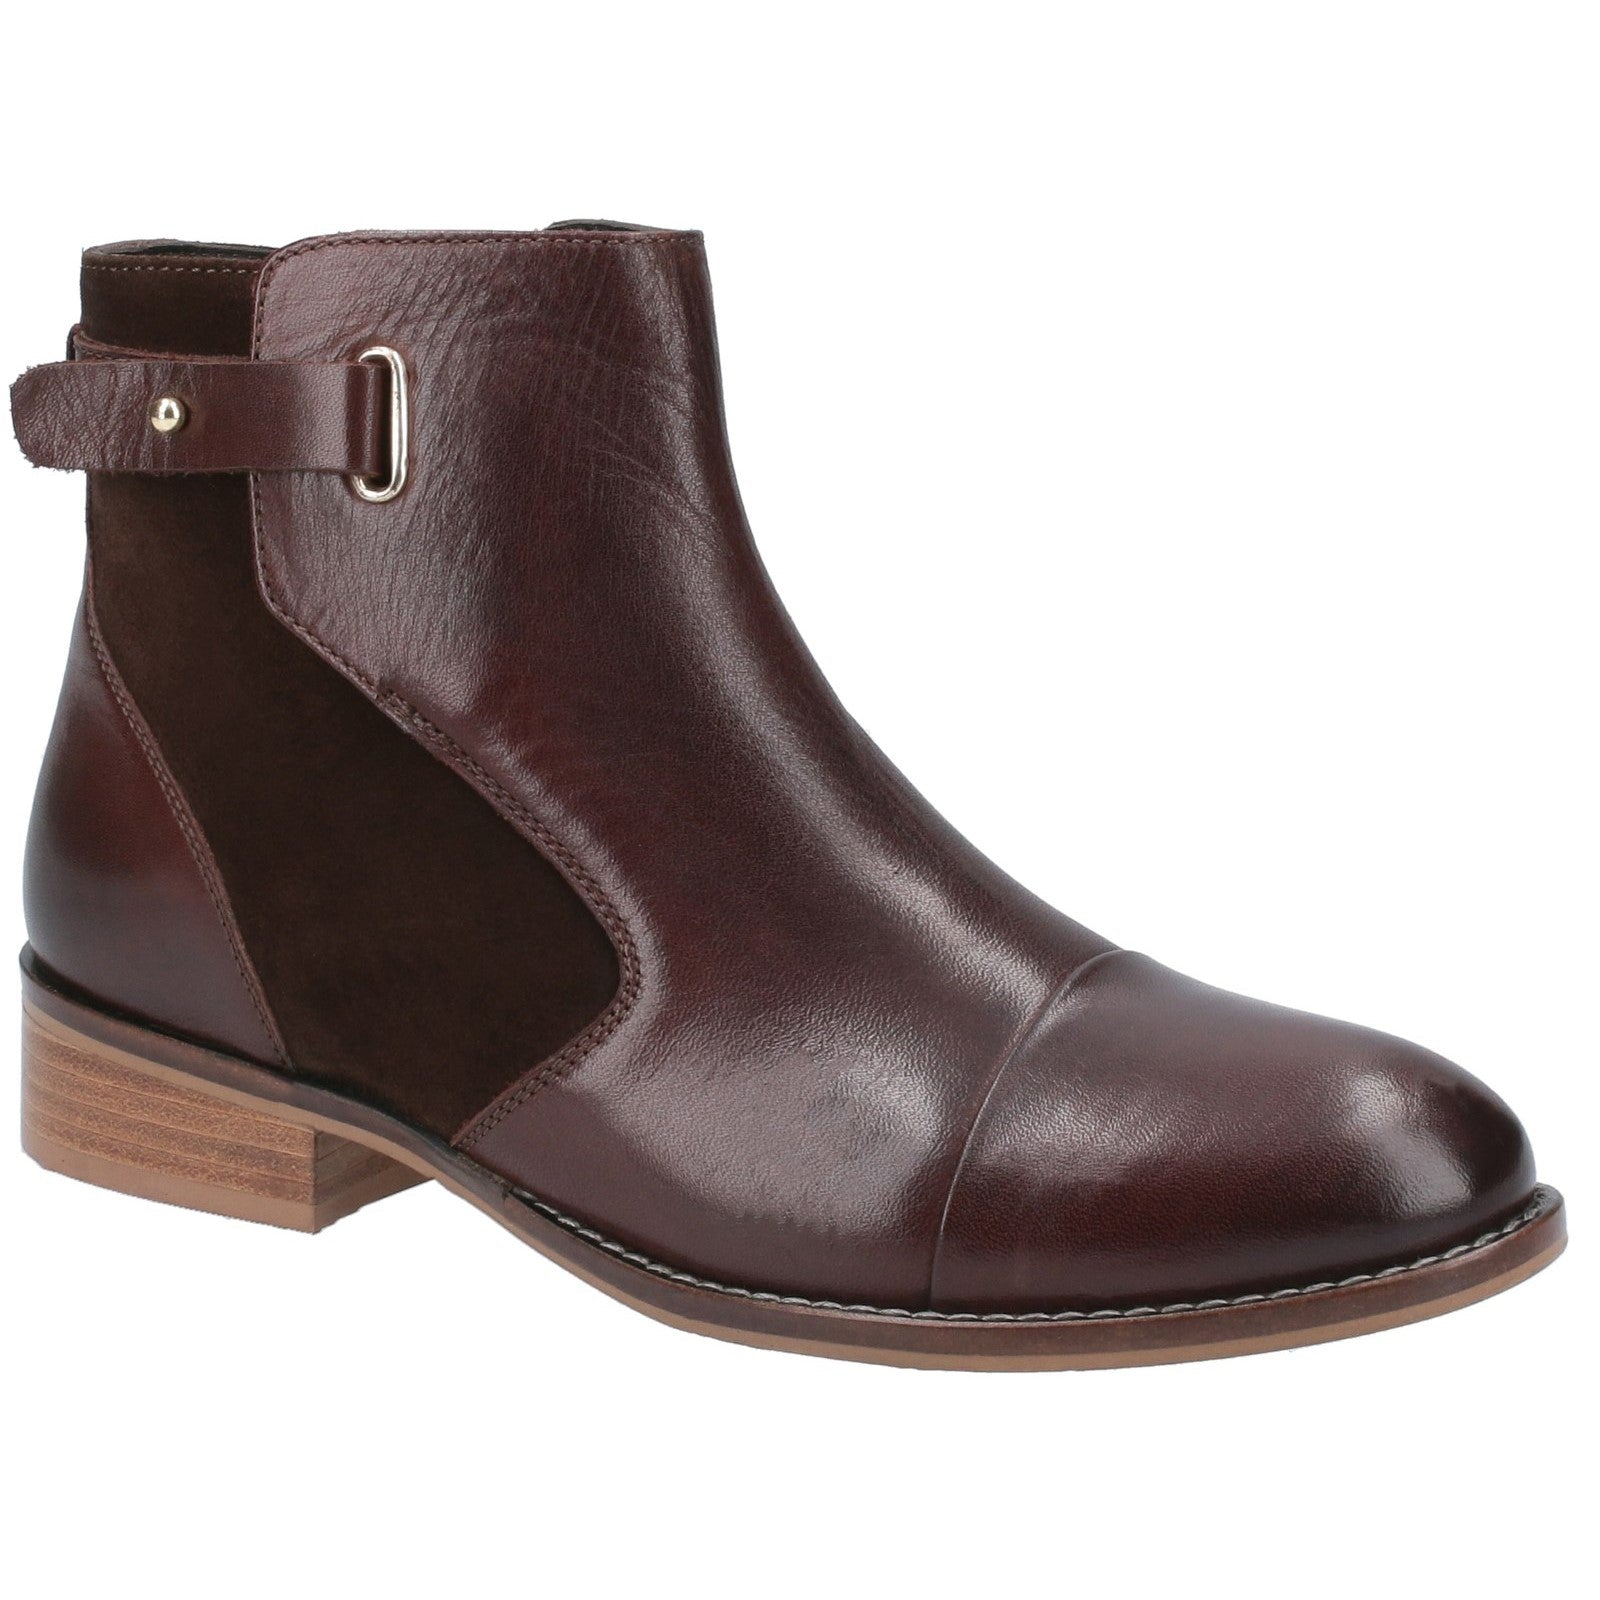 Ladies Ankle Boots Brown Hush Puppies Hollie Zip Up Ankle Boot